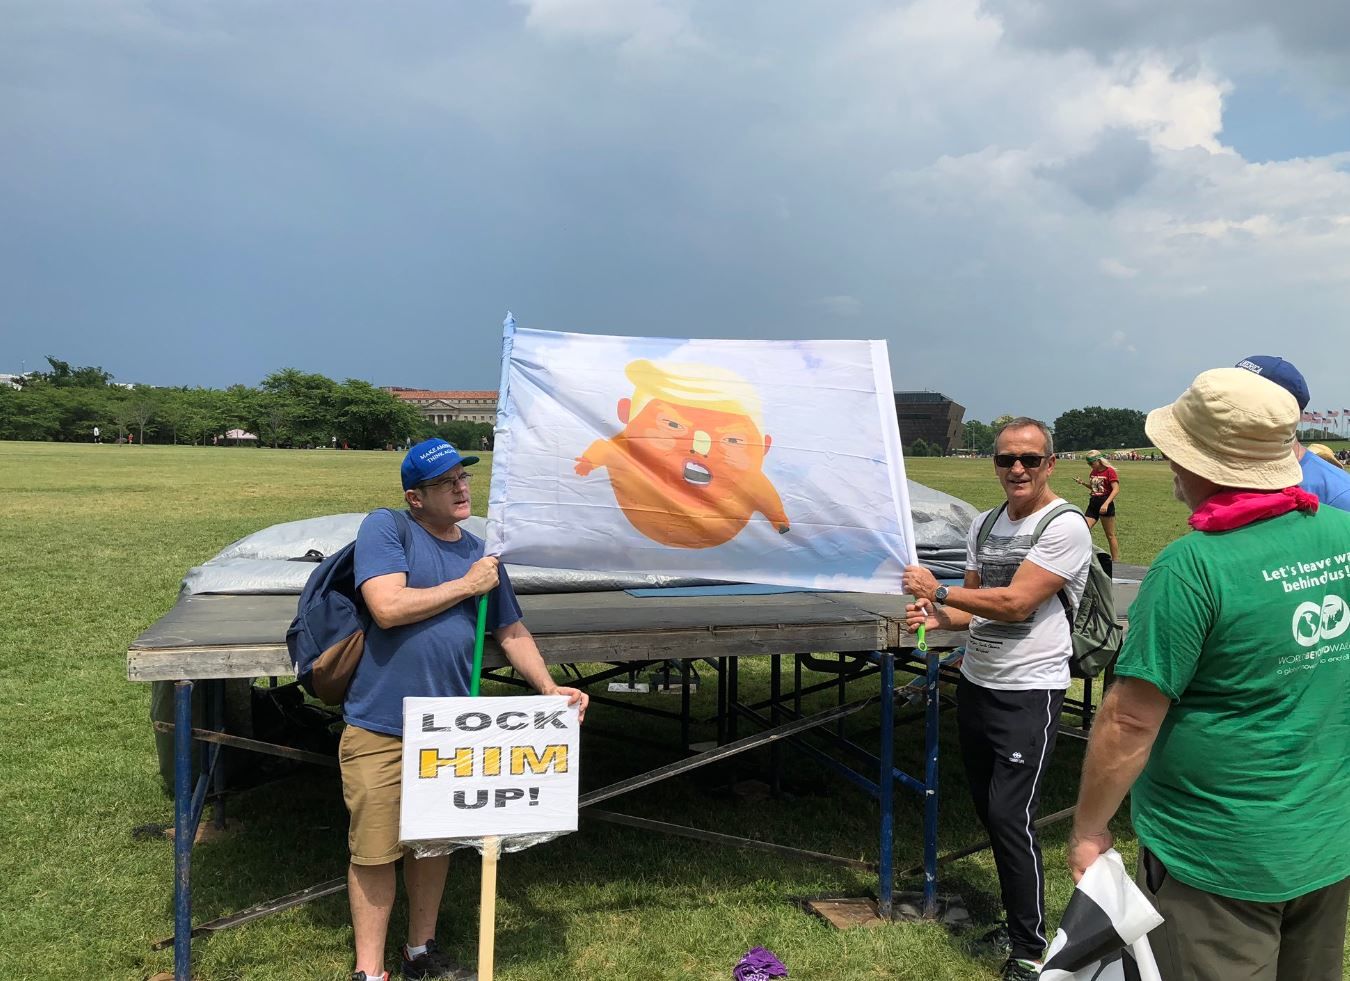 An inflatable image of President Donald Trump as a baby has been deflated, so protesters are using a flag image of it instead. (WTOP/Mike Murillo)